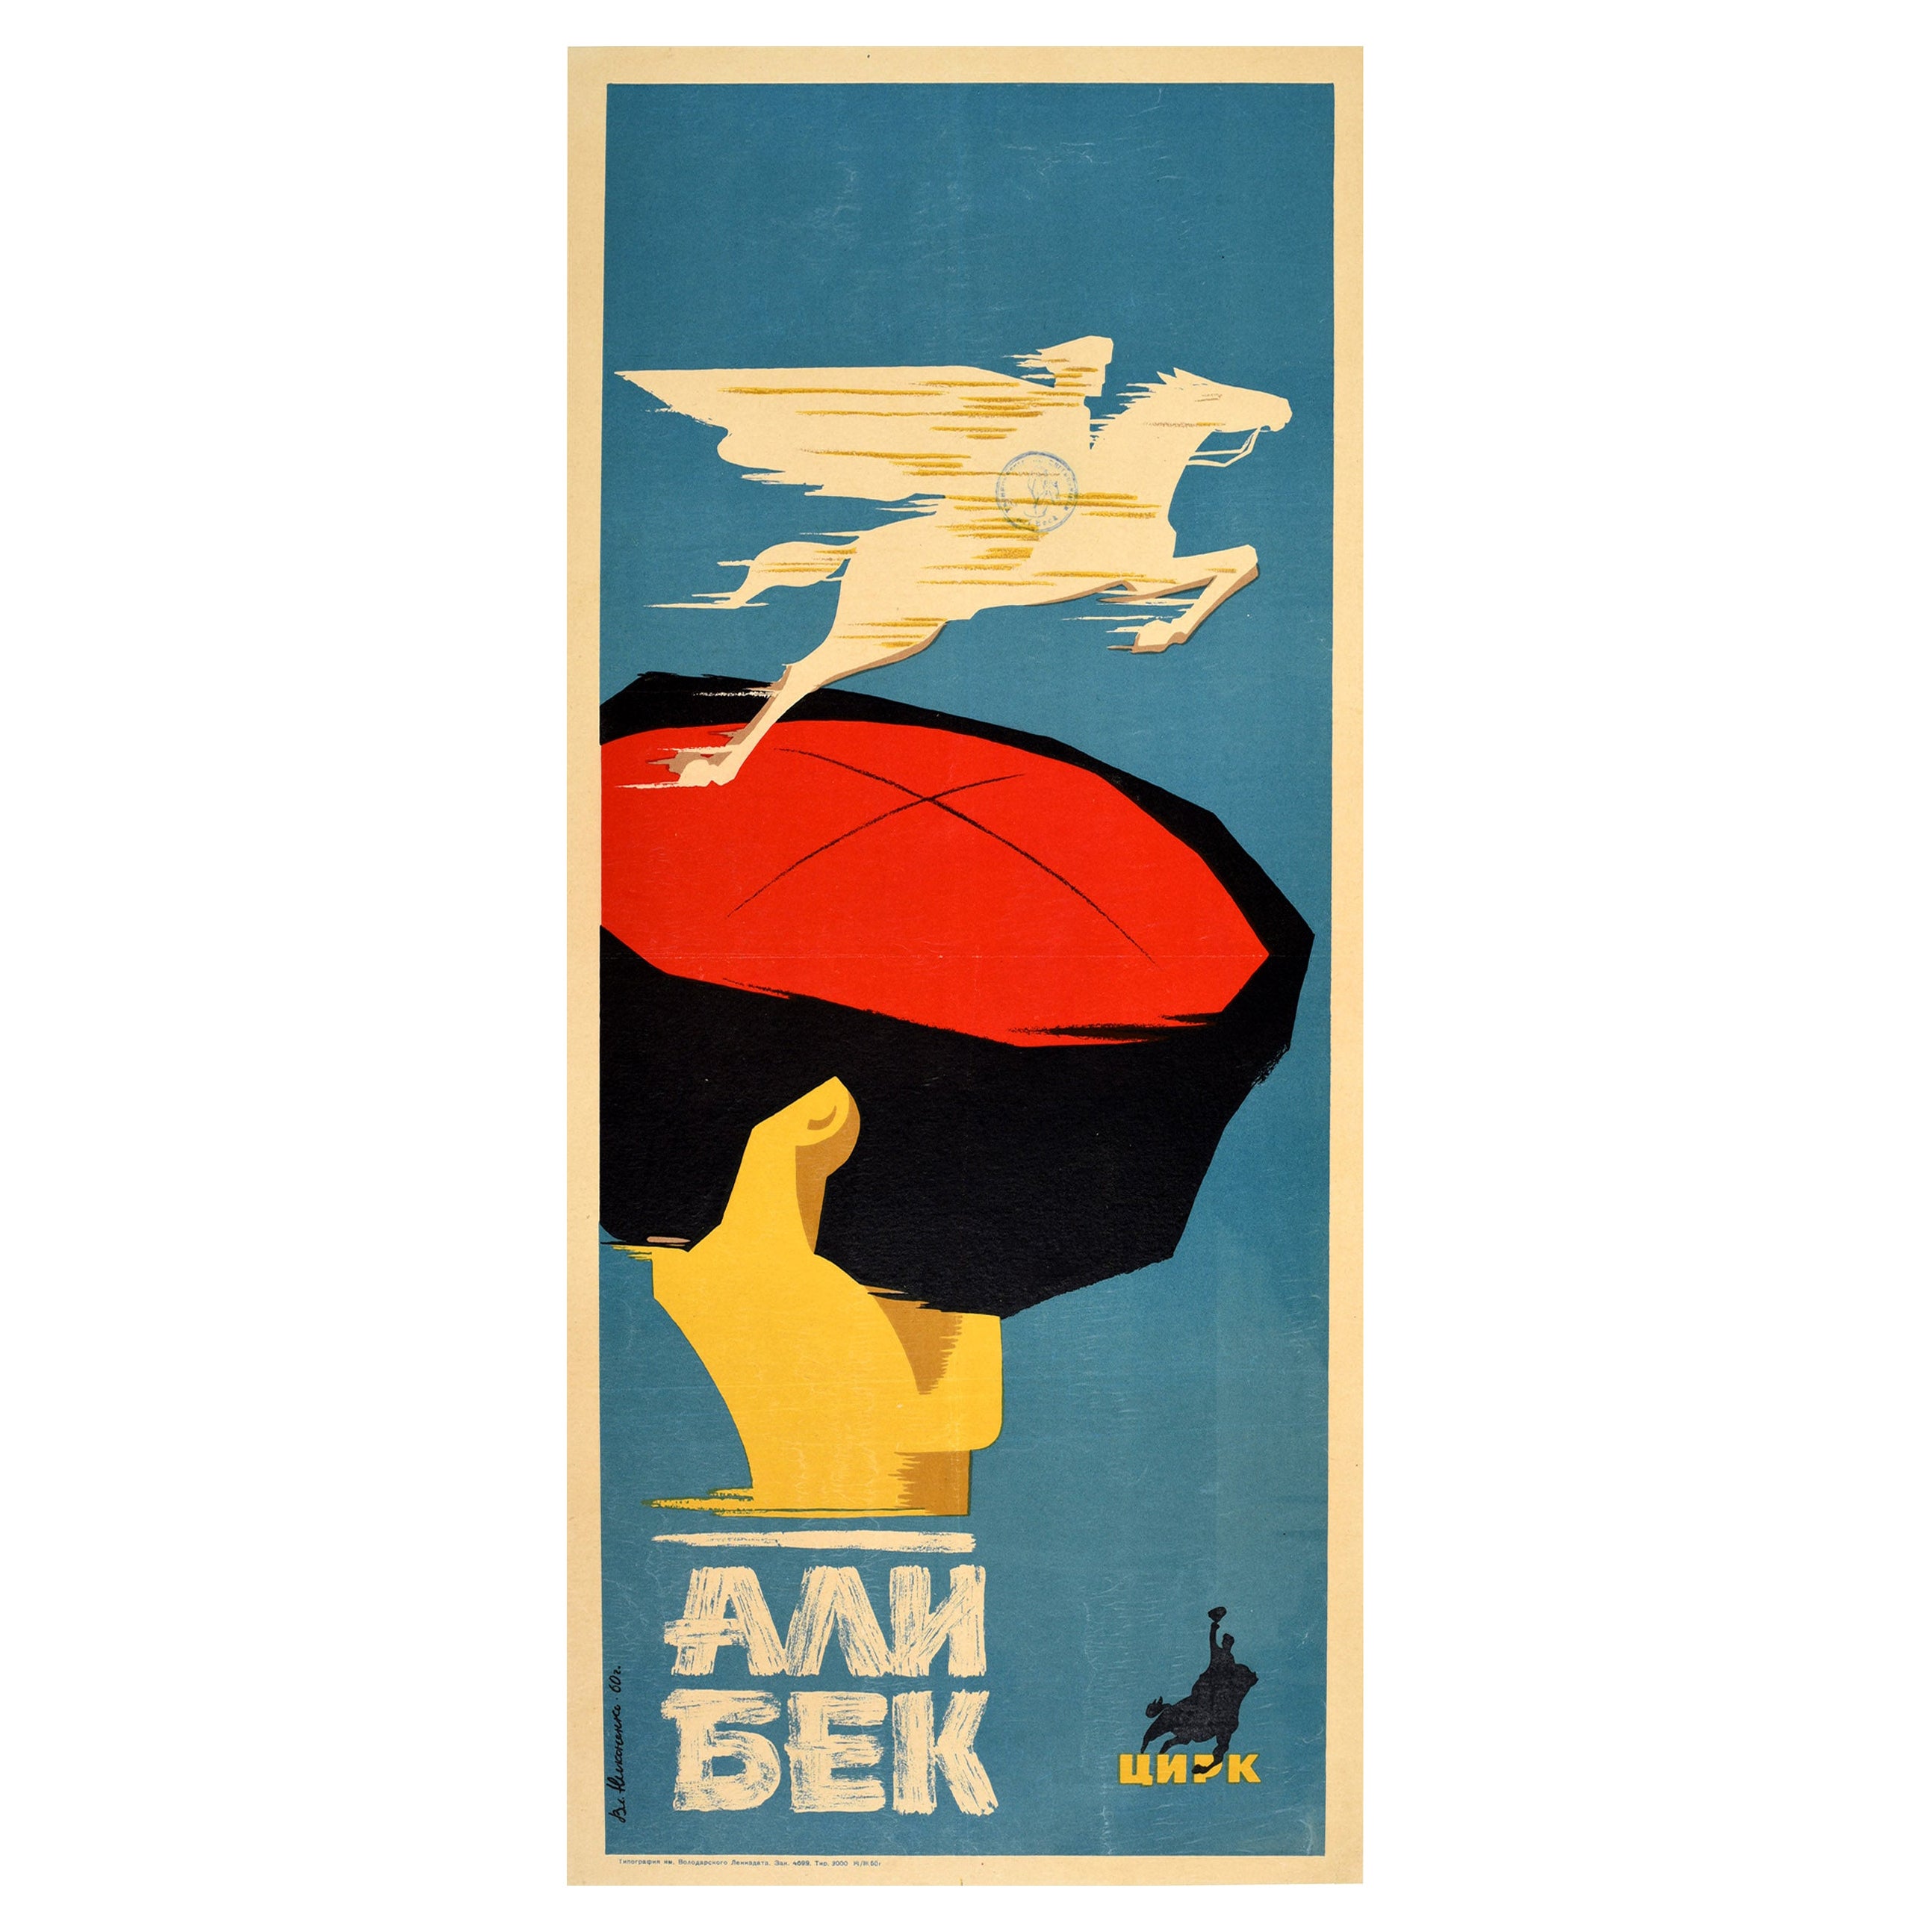 Original Vintage Circus Poster For The Alibek Cyrk Horse Rider Performance Art For Sale